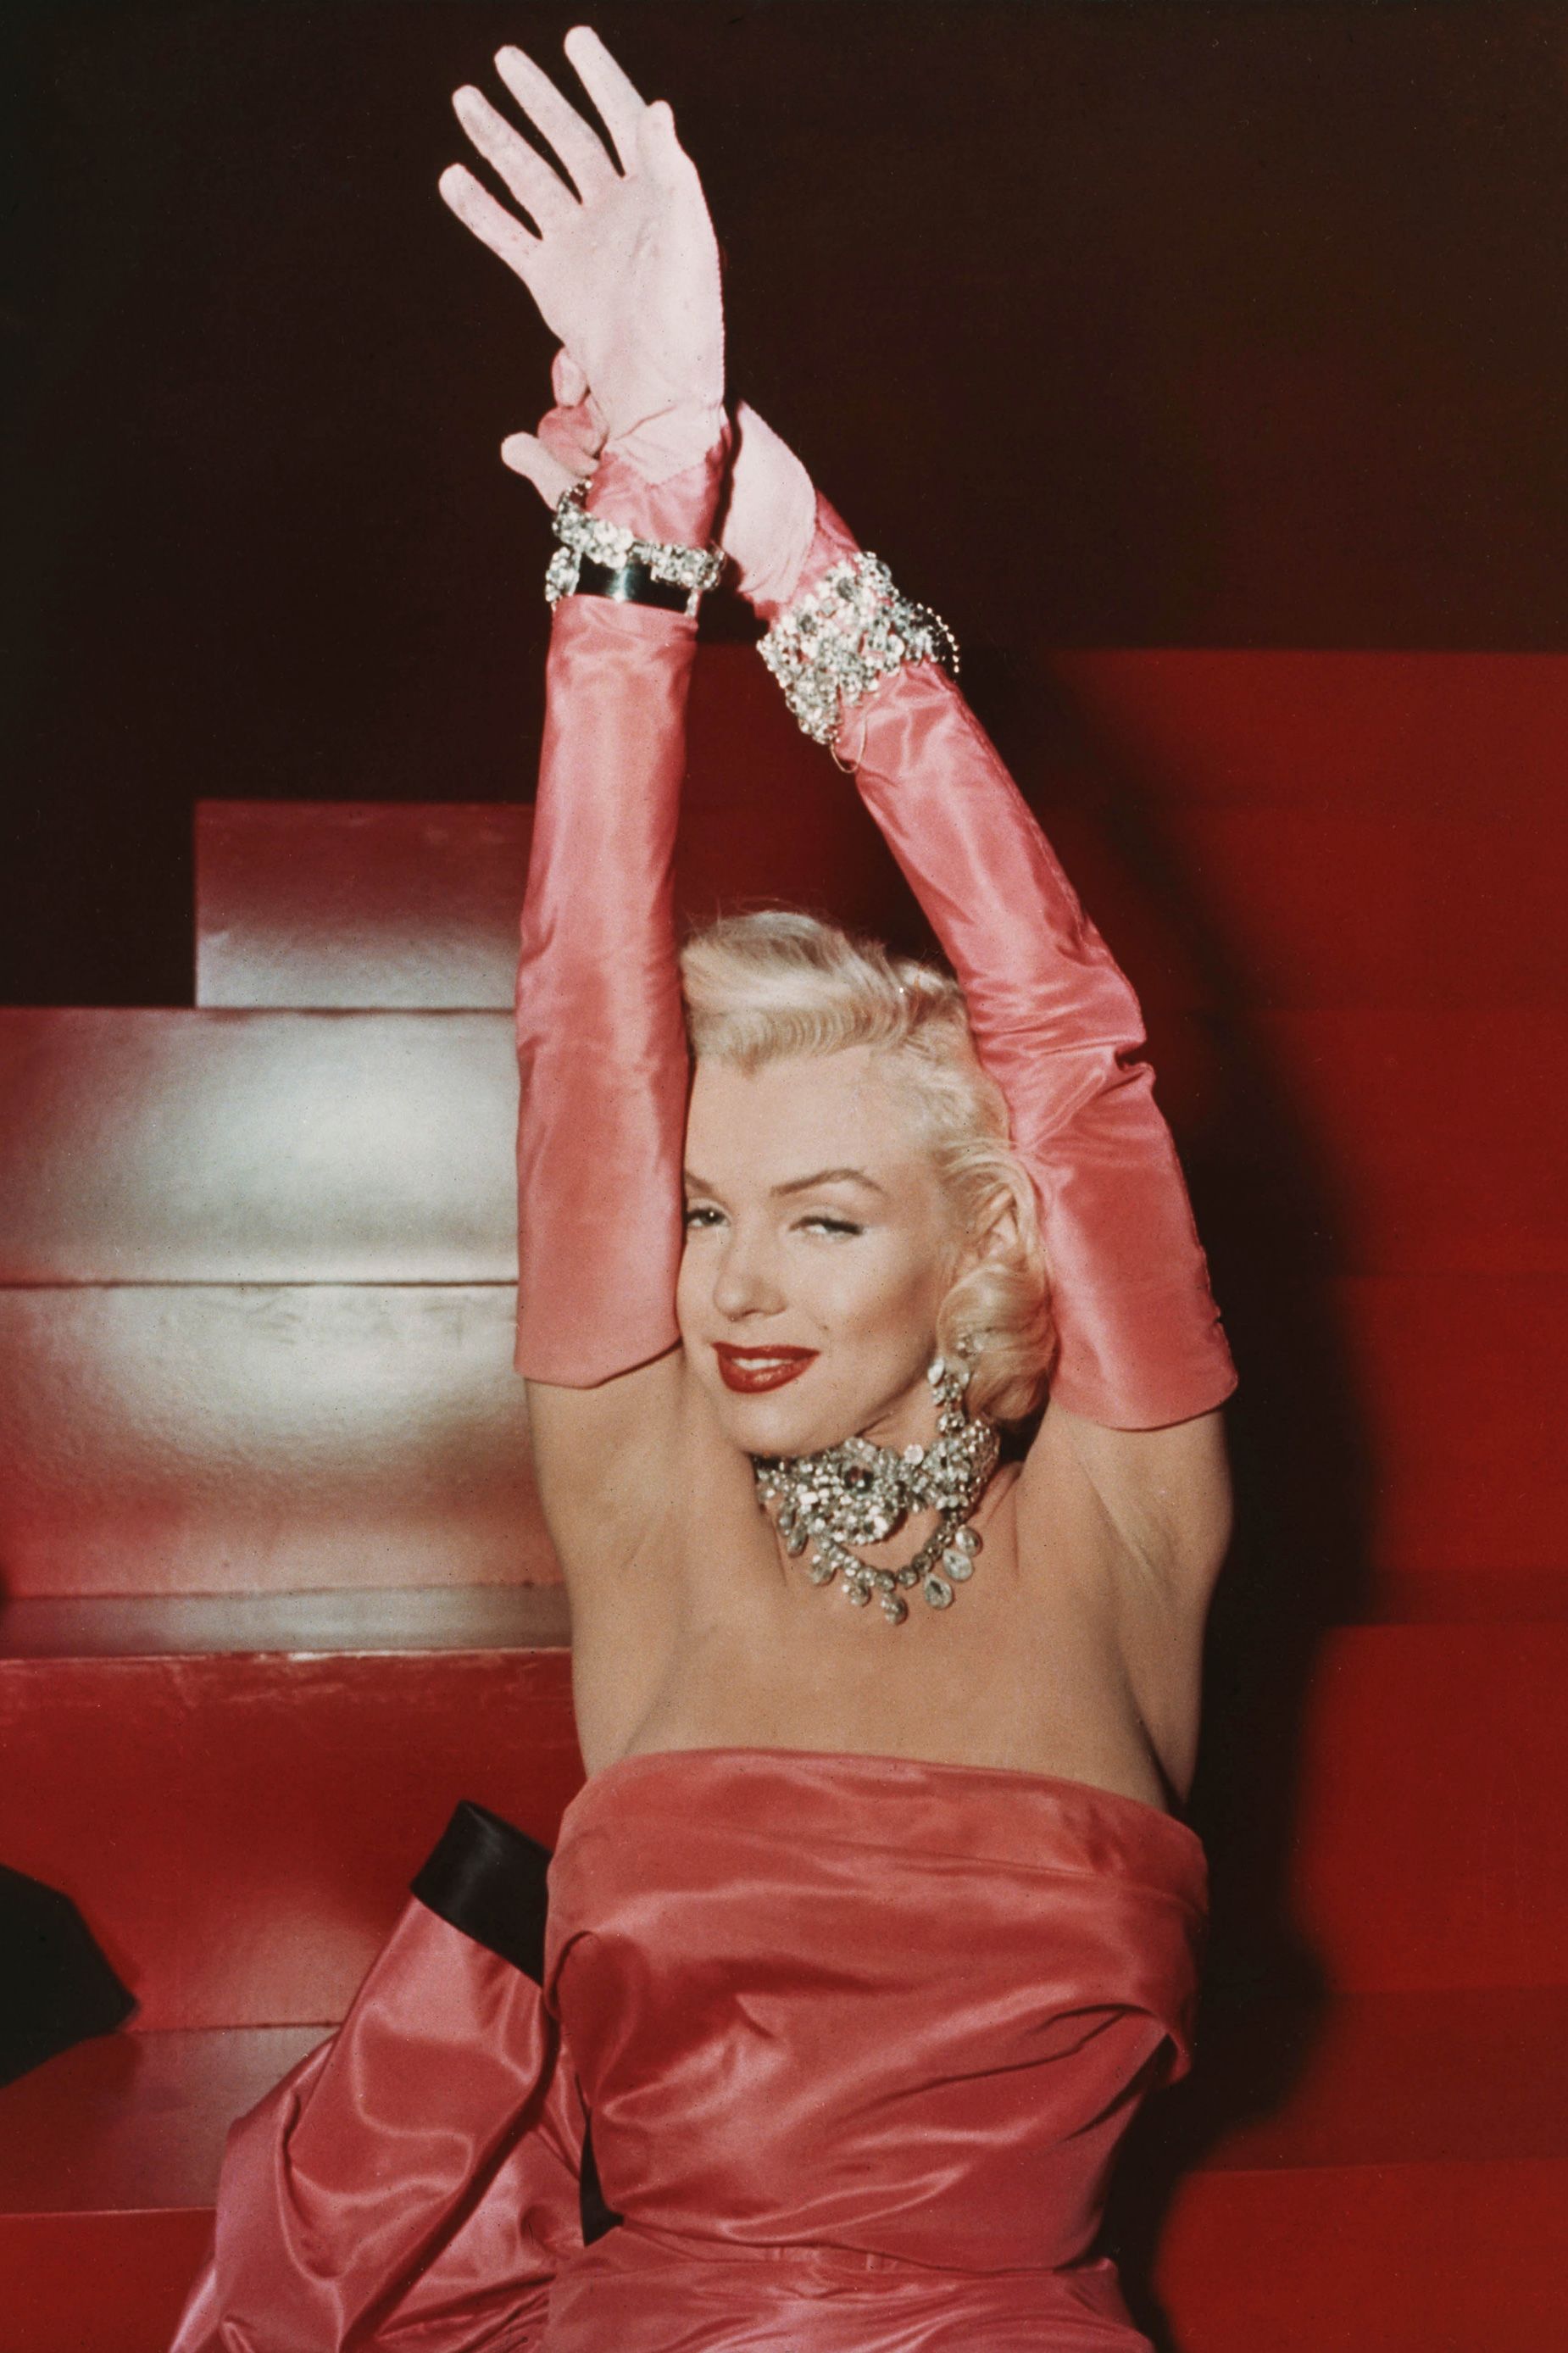 Marilyn Monroe created an iconic opera gloves moment, teaming them with a bustier dress in the 1953 movie Gentlemen Prefer Blondes.